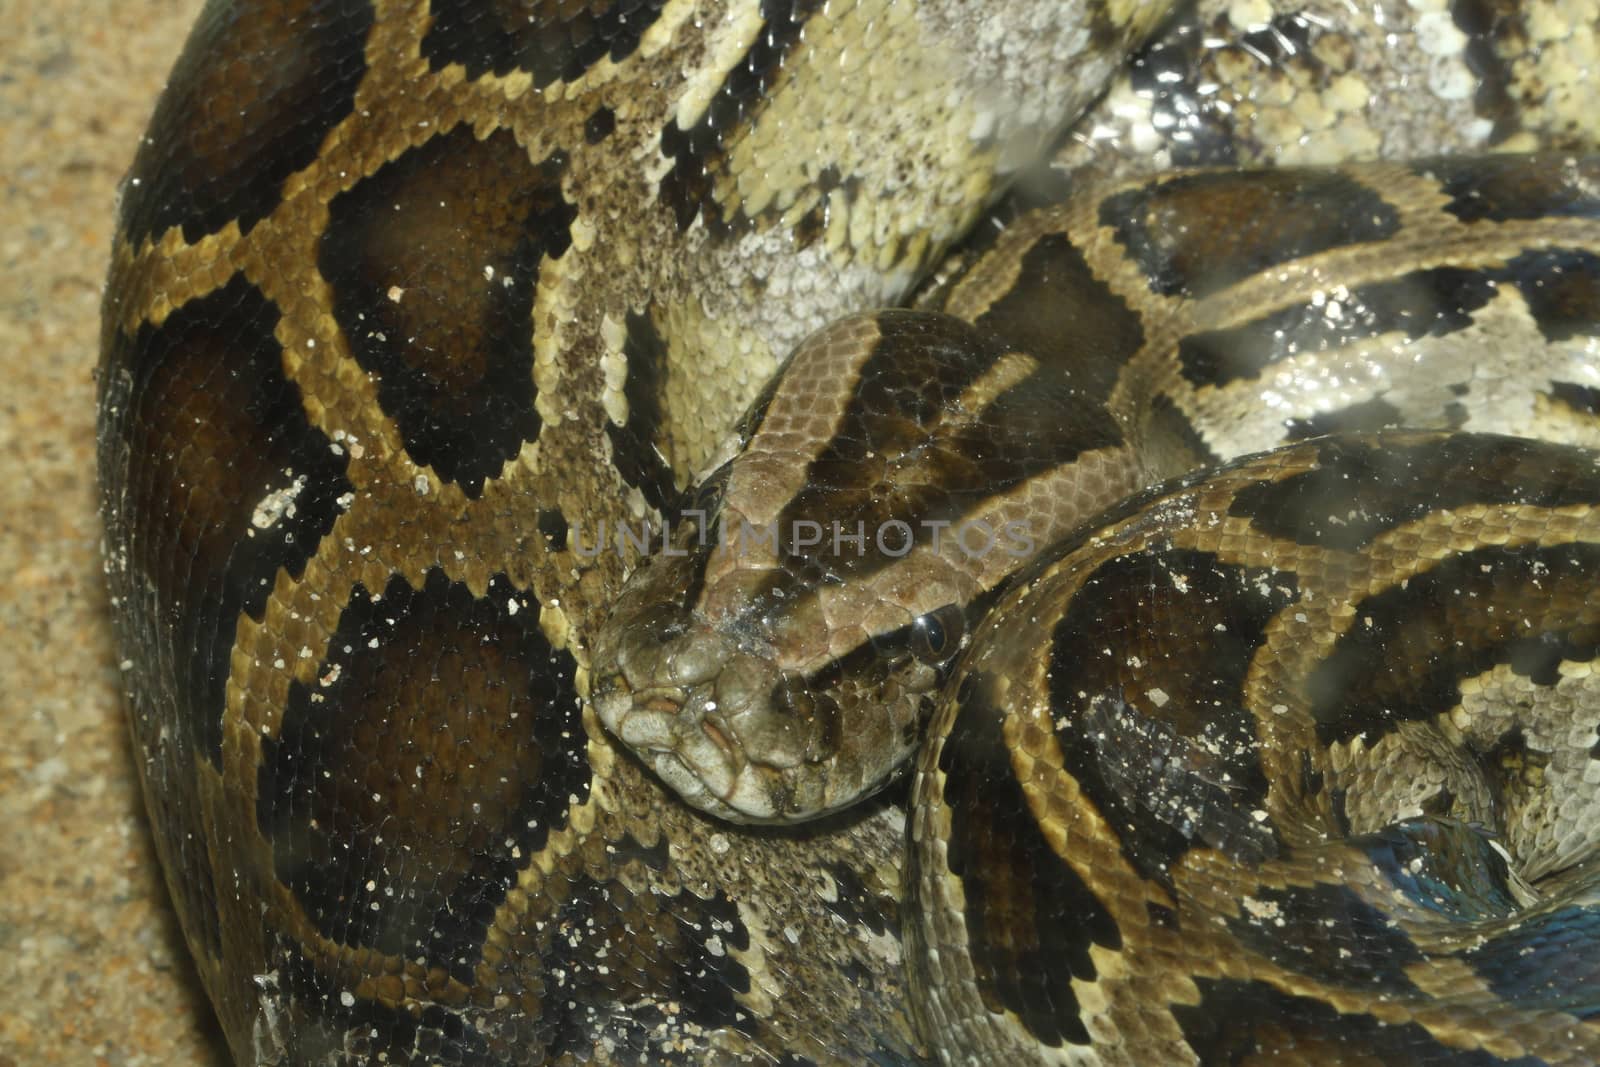 Snake head close up picture by pumppump